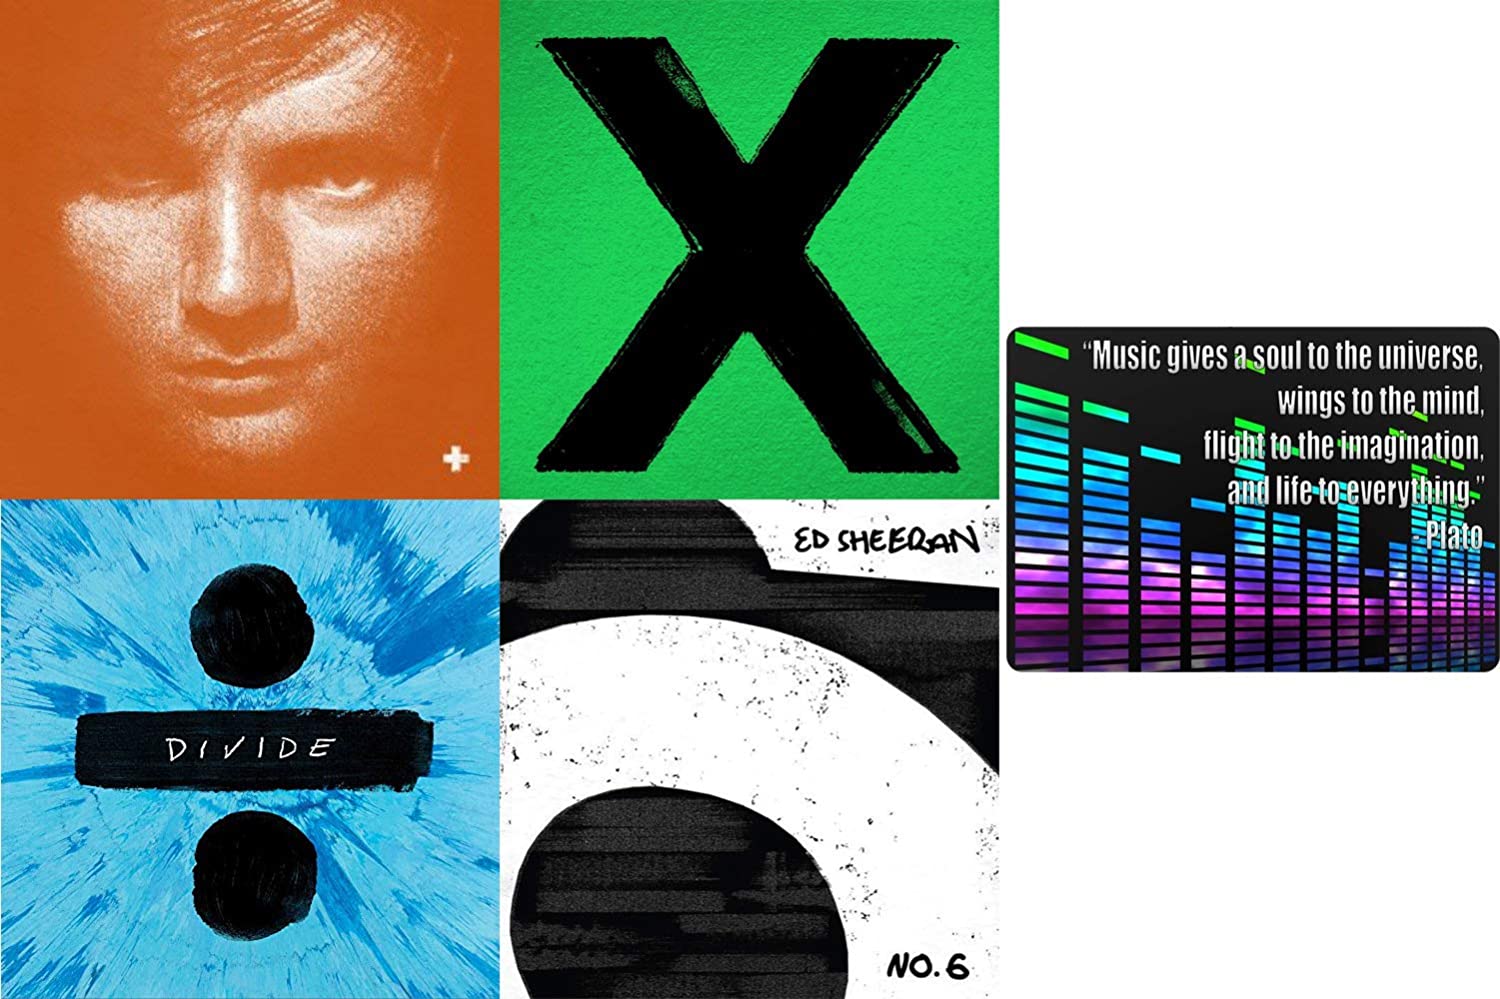 Ed Sheeran Sheeran: Complete Studio Album Discography CD Collection with Bonus Art Card (No. 6 Collaboration Project / Divide and More).com Music